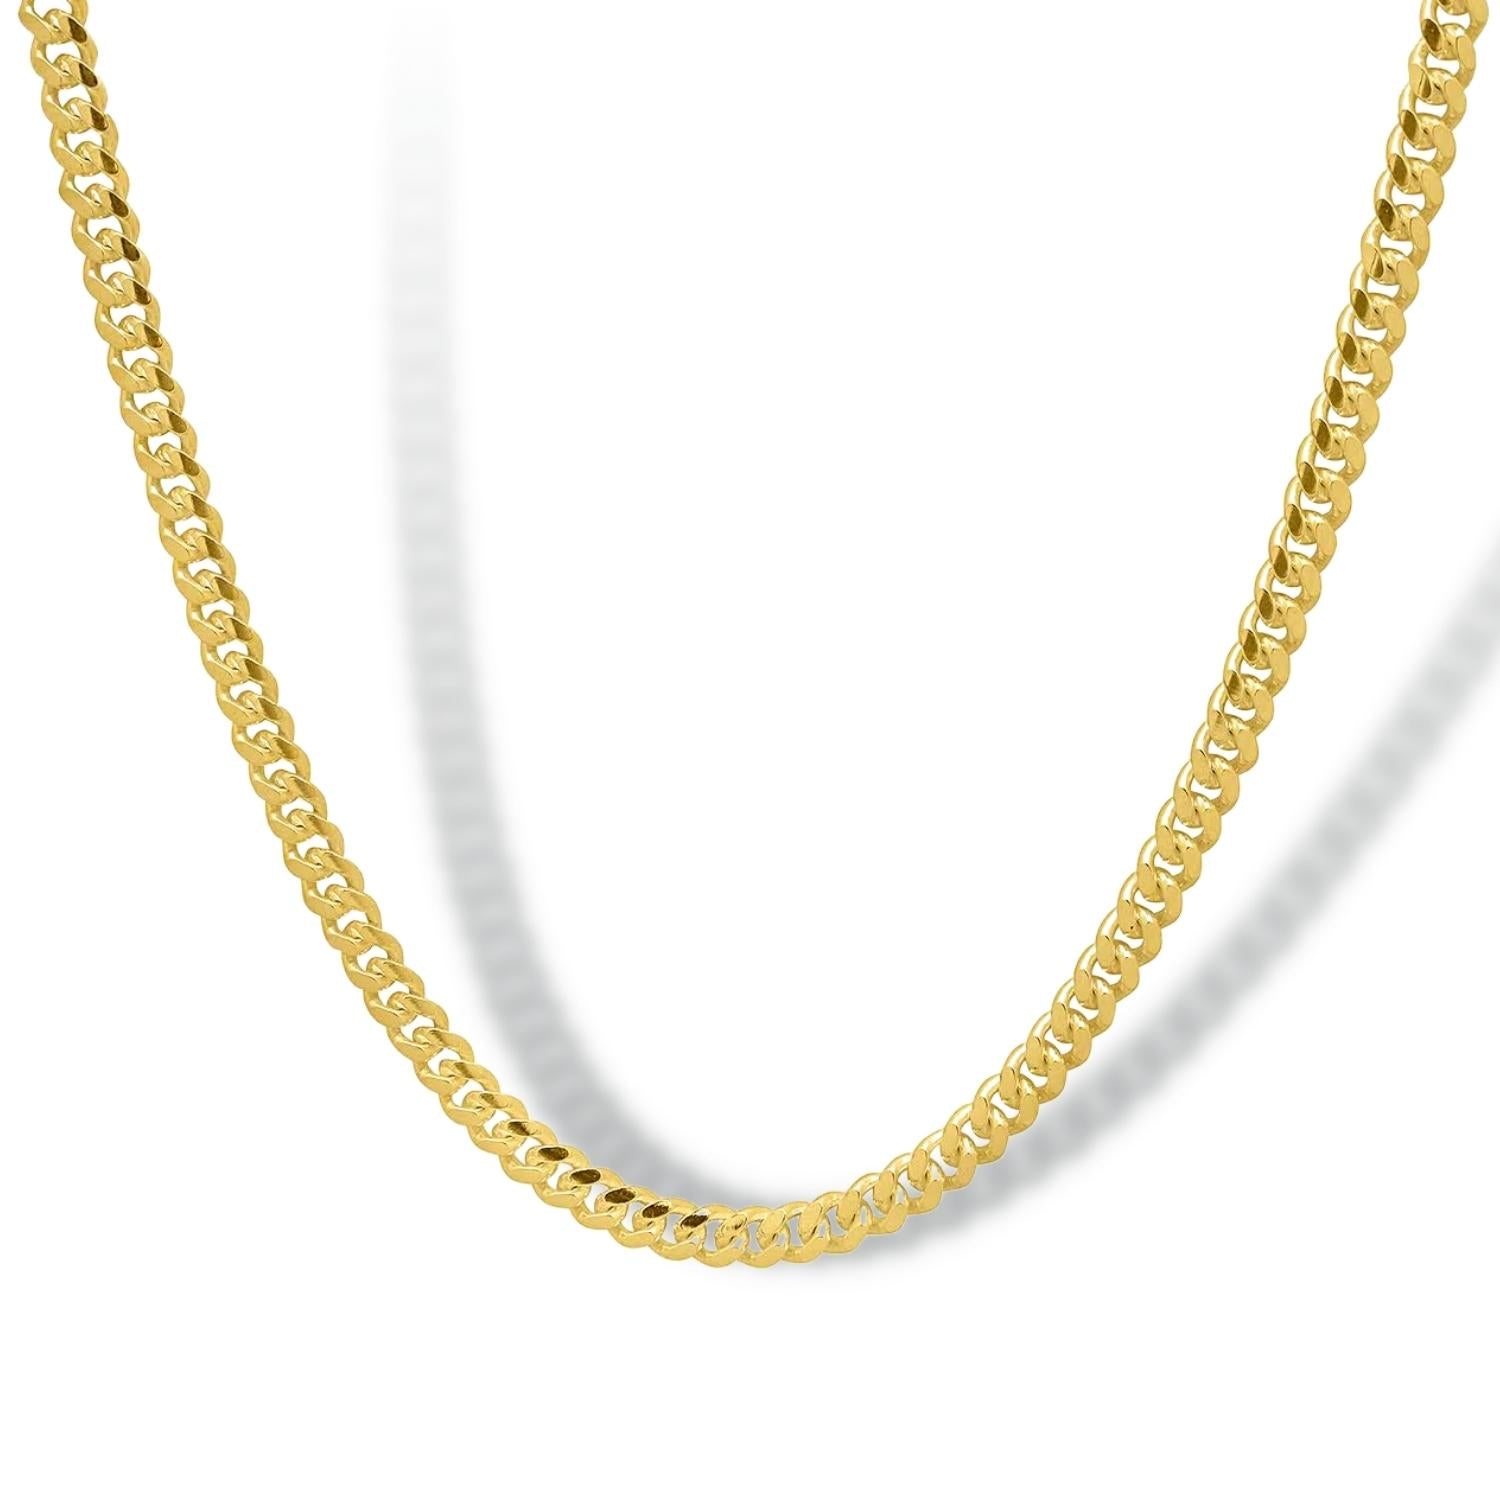 Solid Yellow Gold Miami Cuban Chain 4mm Width